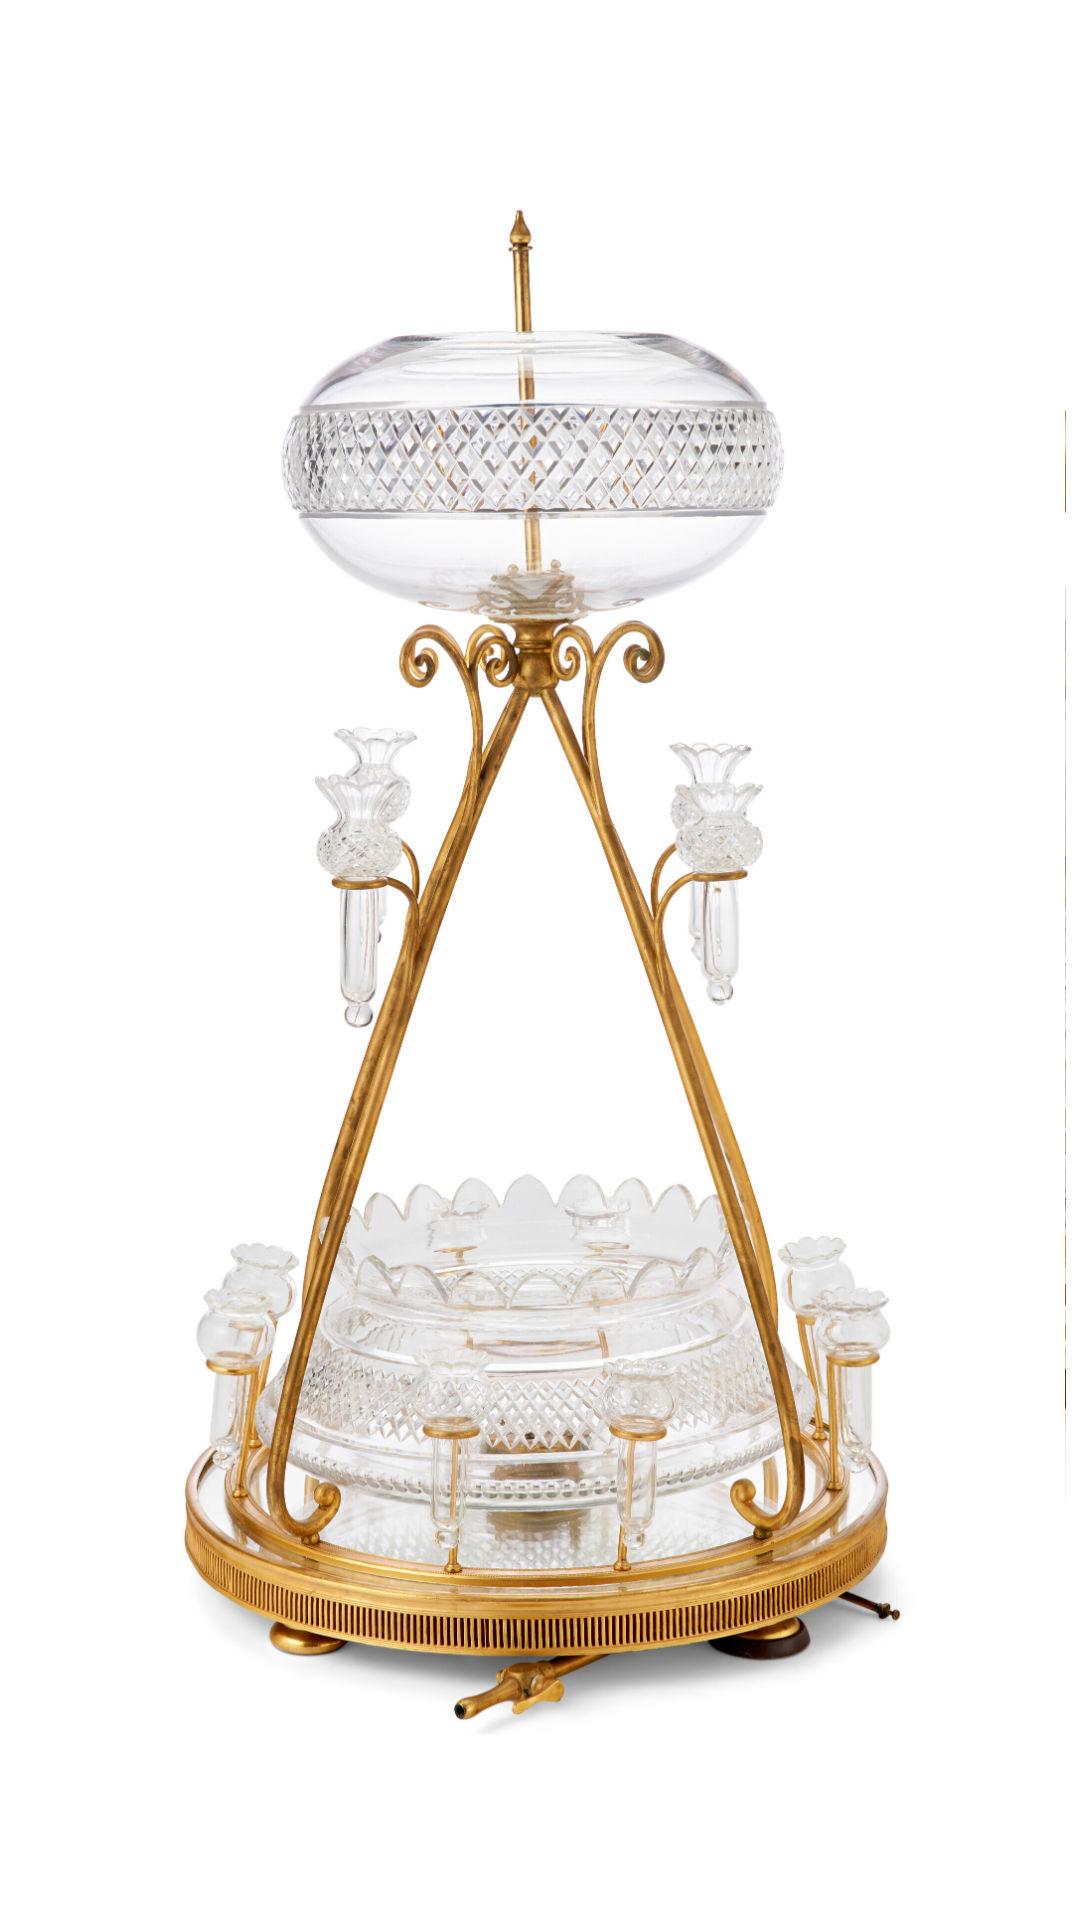 Our cut-crystal and gilt bronze fountain comes from the widely admired glass maker, F. & C. Osler of Birmingham, circa 1885. This rare and unique fountain is comprised of an upper reservoir and lower bowl of cut crystal with serrated edges and